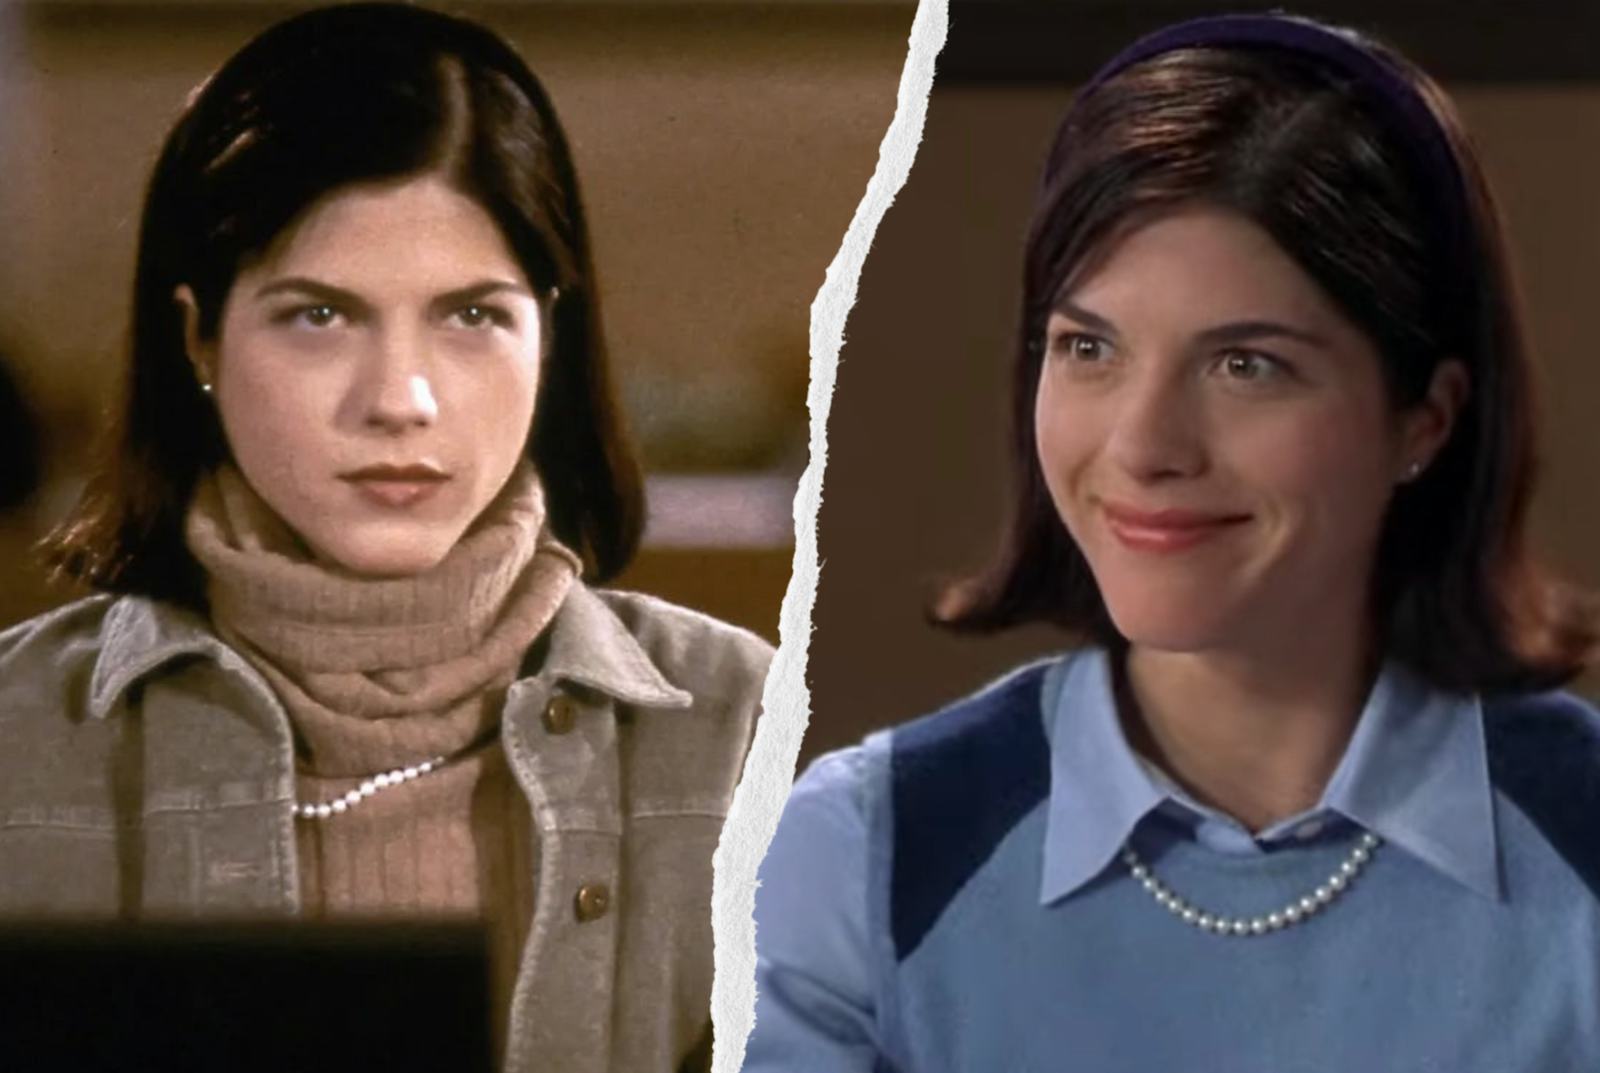 Selma Blair s Outfits In Legally Blonde Are Textbook Dark Academia